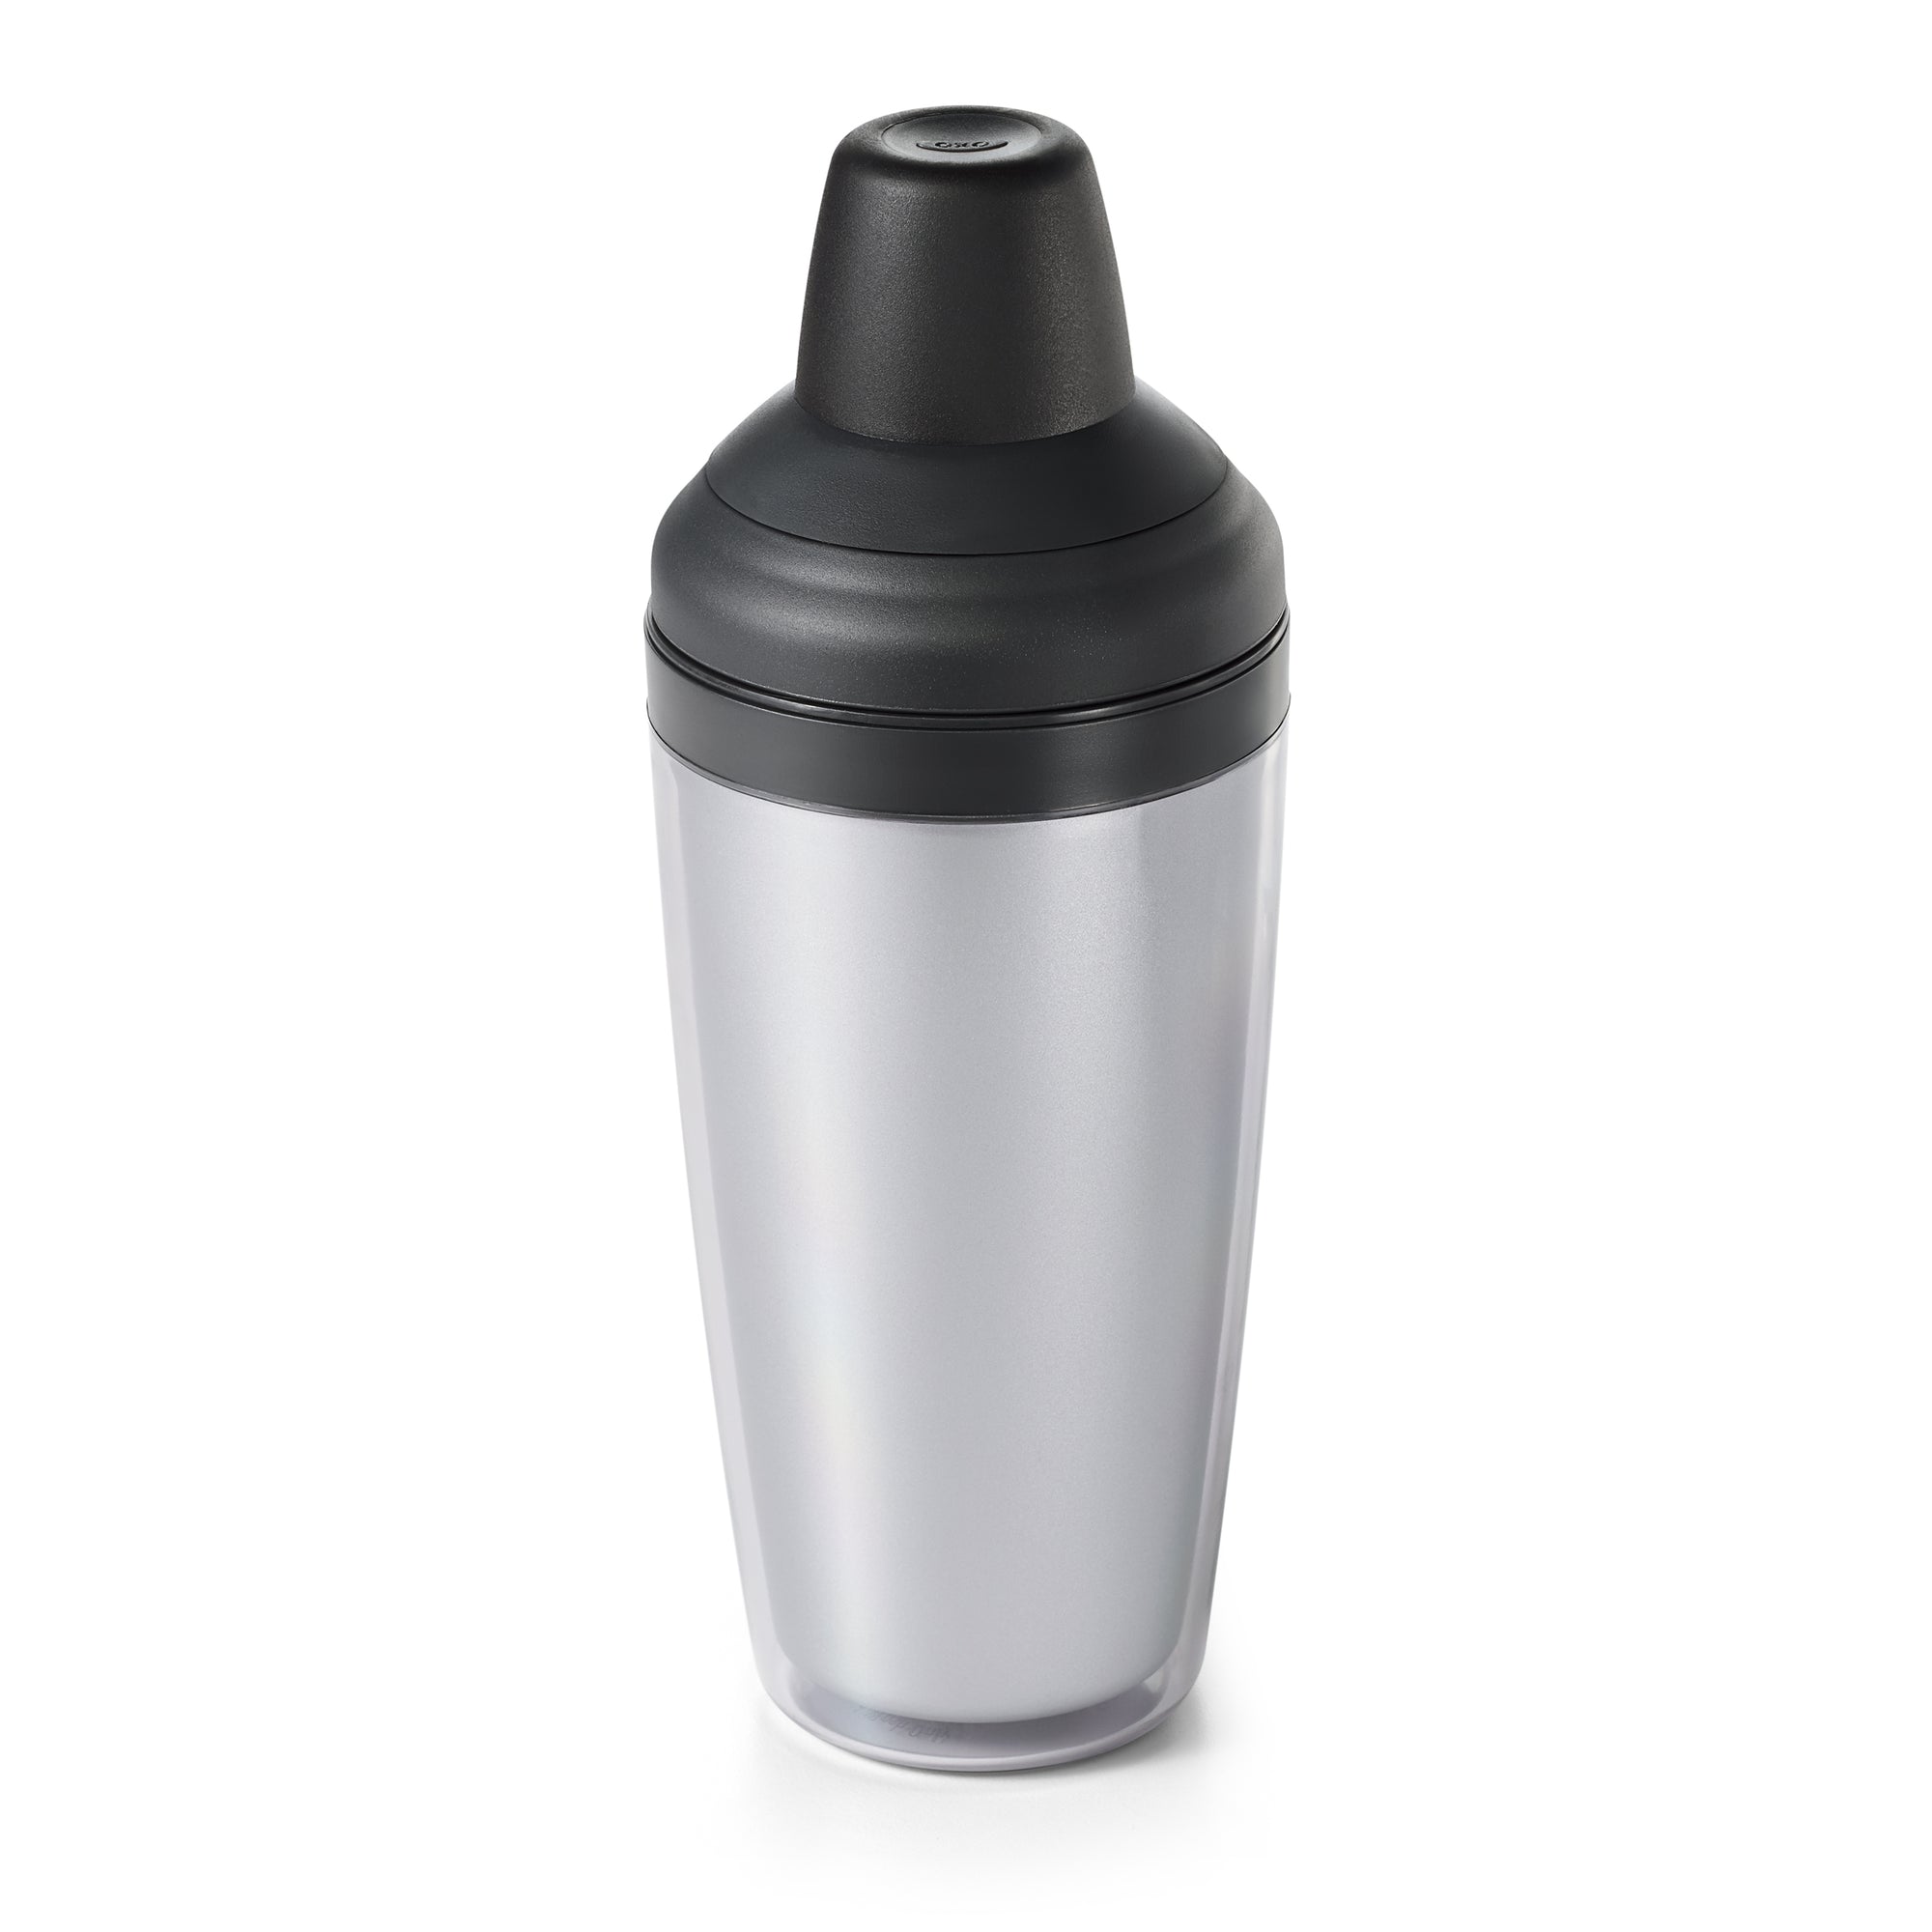 OXO Double-Walled Stainless Steel Cocktail Shaker + Reviews